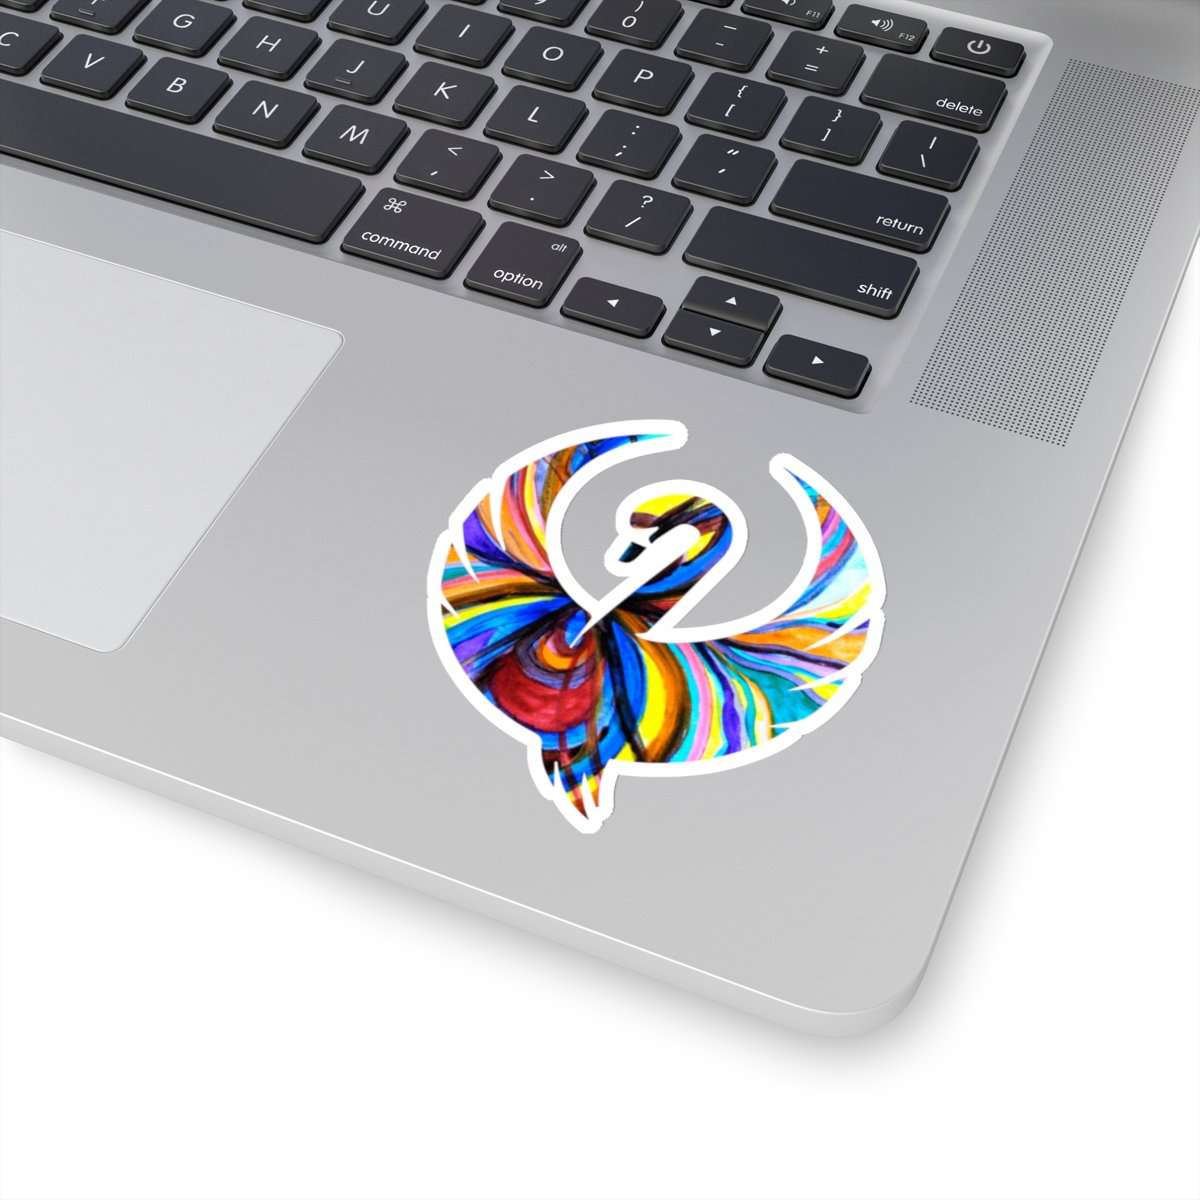 buy-and-sell-relationship-swan-stickers-online-now_7.jpg